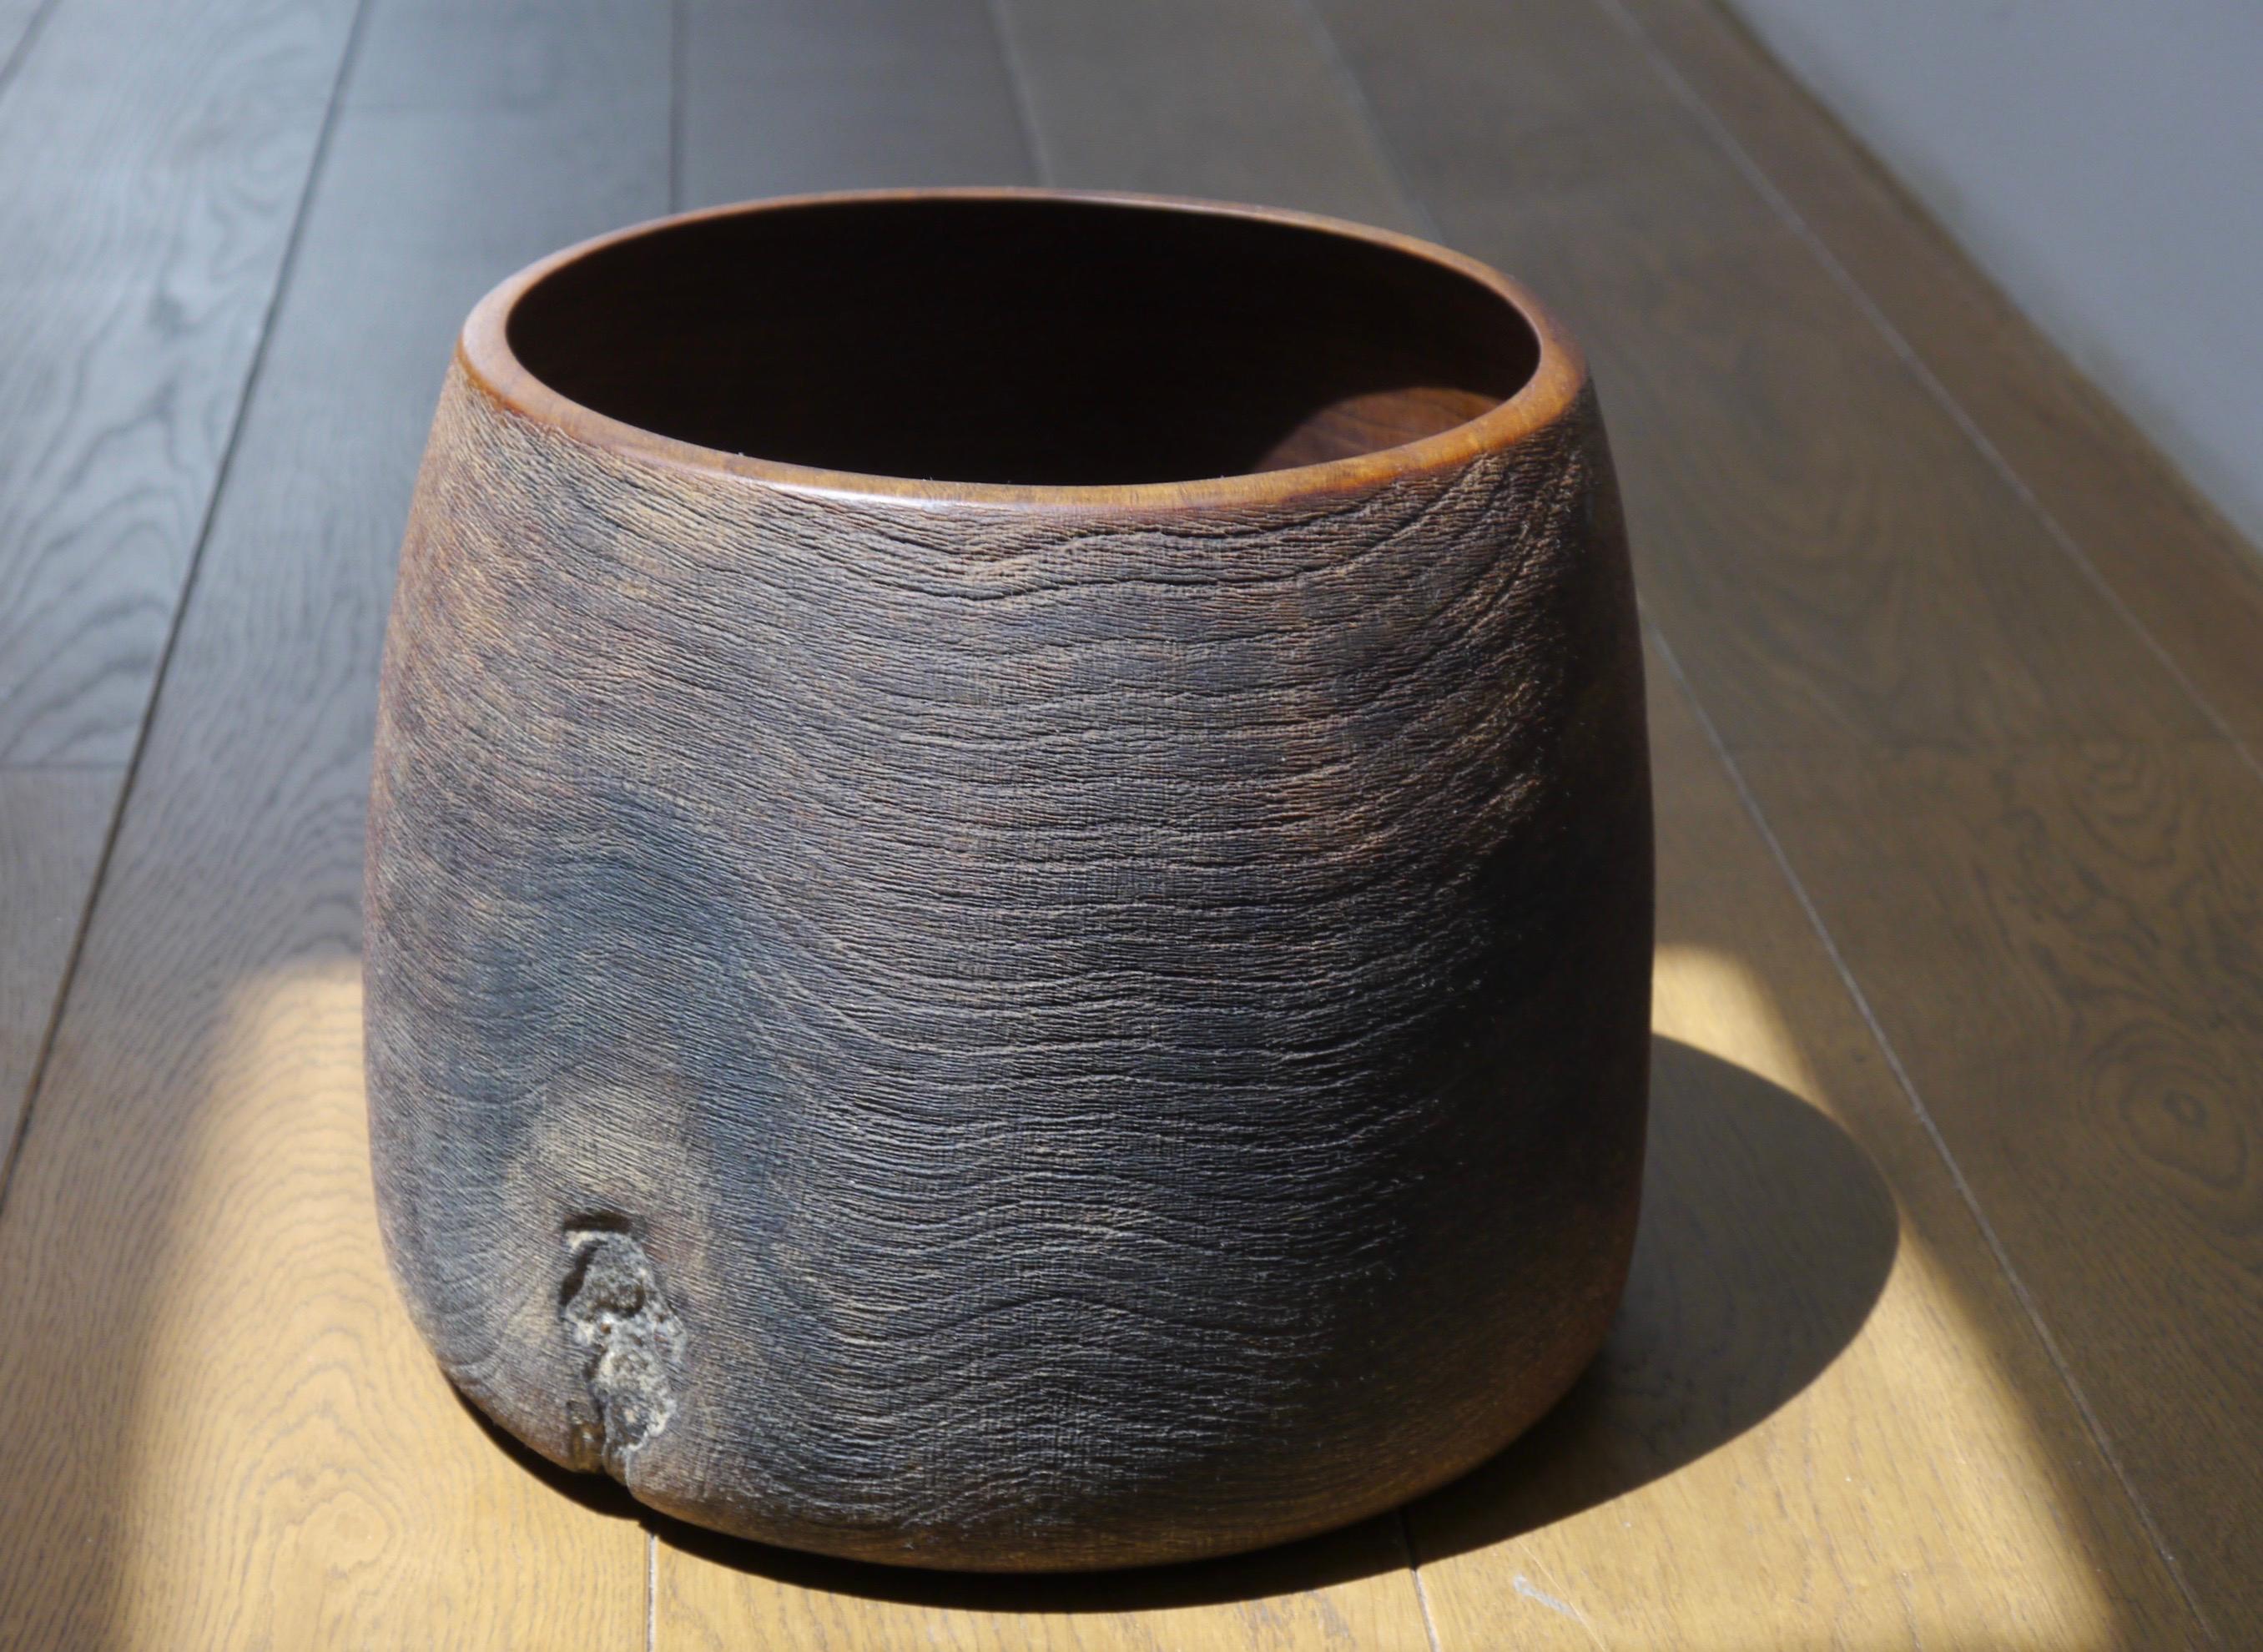 Limed oak bowl by Fritz Baumann
Dimensions: Ø 27 x H 23 cm
Materials: Oak 

Hand made from solid pieces of wood, free-cut following the natural grain, made one by one, the stools of Fritz Baumann are the kind of objects that remind us of the